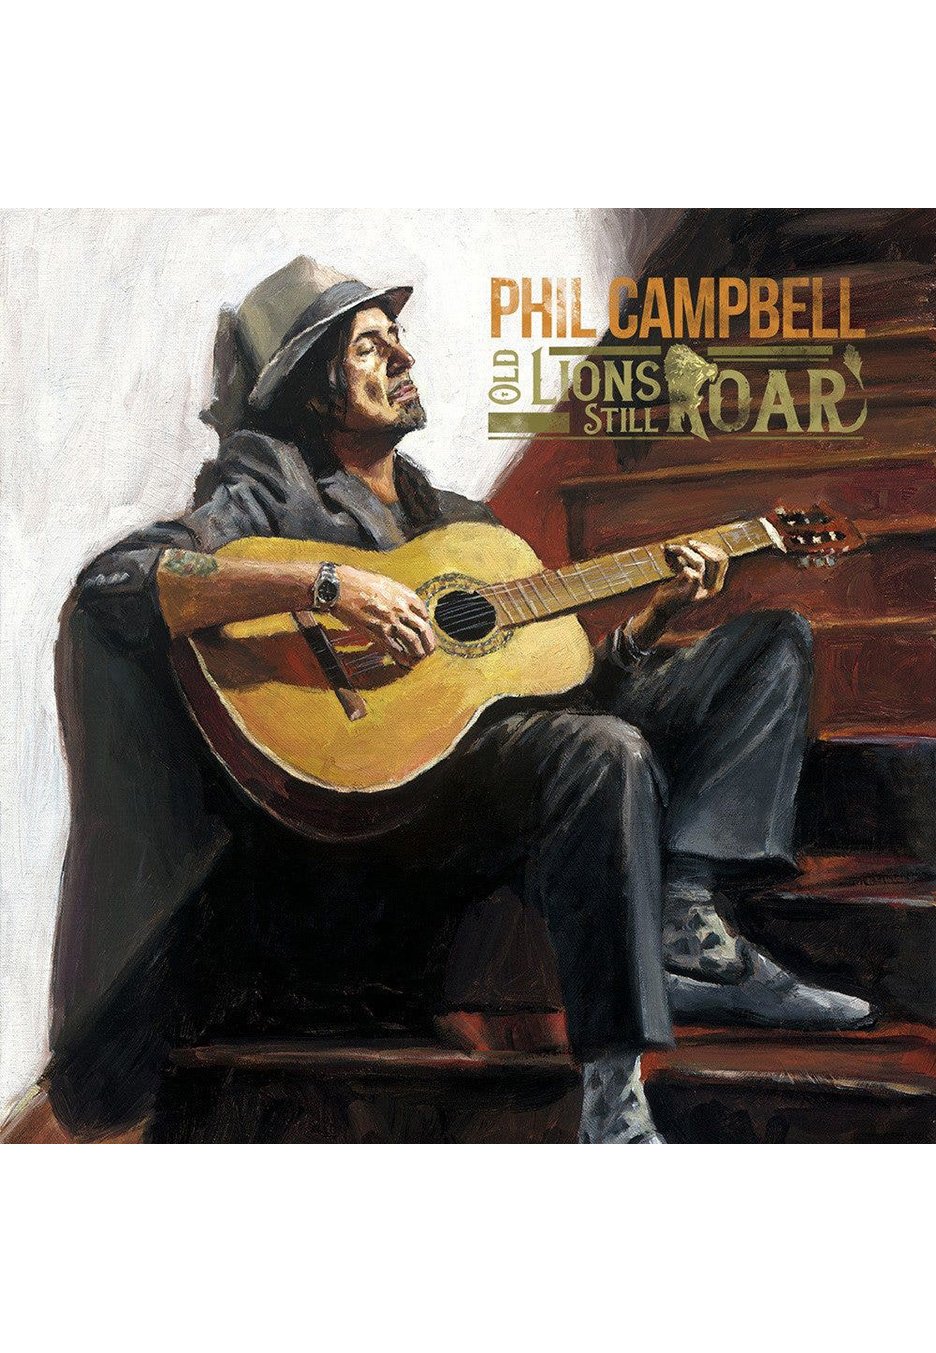 Phil Campbell - Old Lions Still Roar Clear - Colored Vinyl